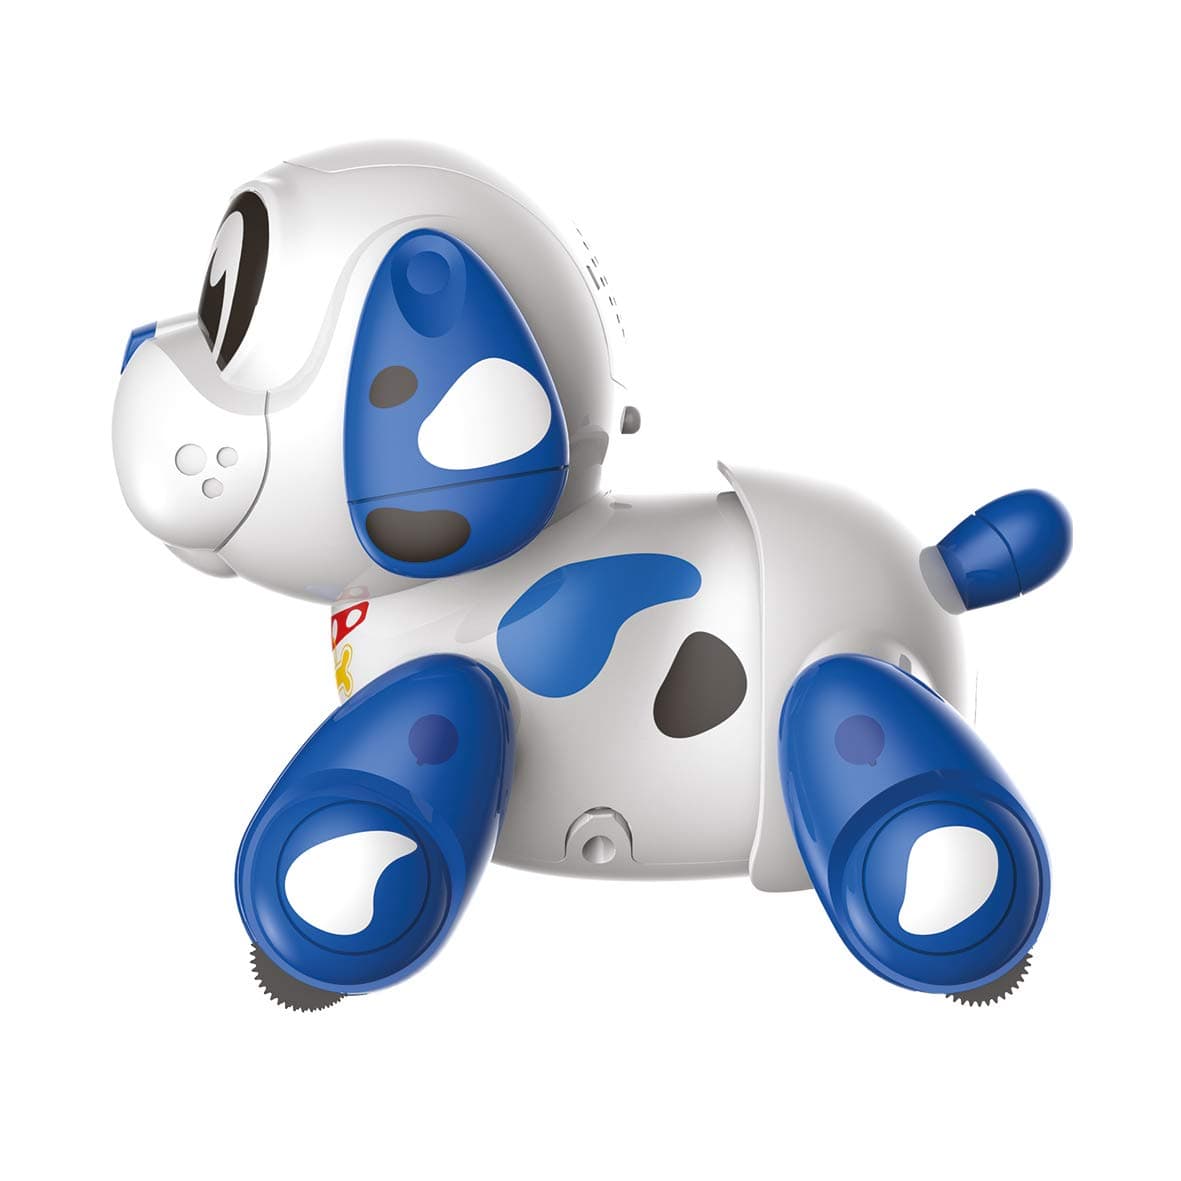 YCOO Ruffy- Your Kids Lively Robotic Pet Puppy with Touch Control, Realistic Pet Sound, Funny Poses by Silverlit Toys Hong Kong Toy